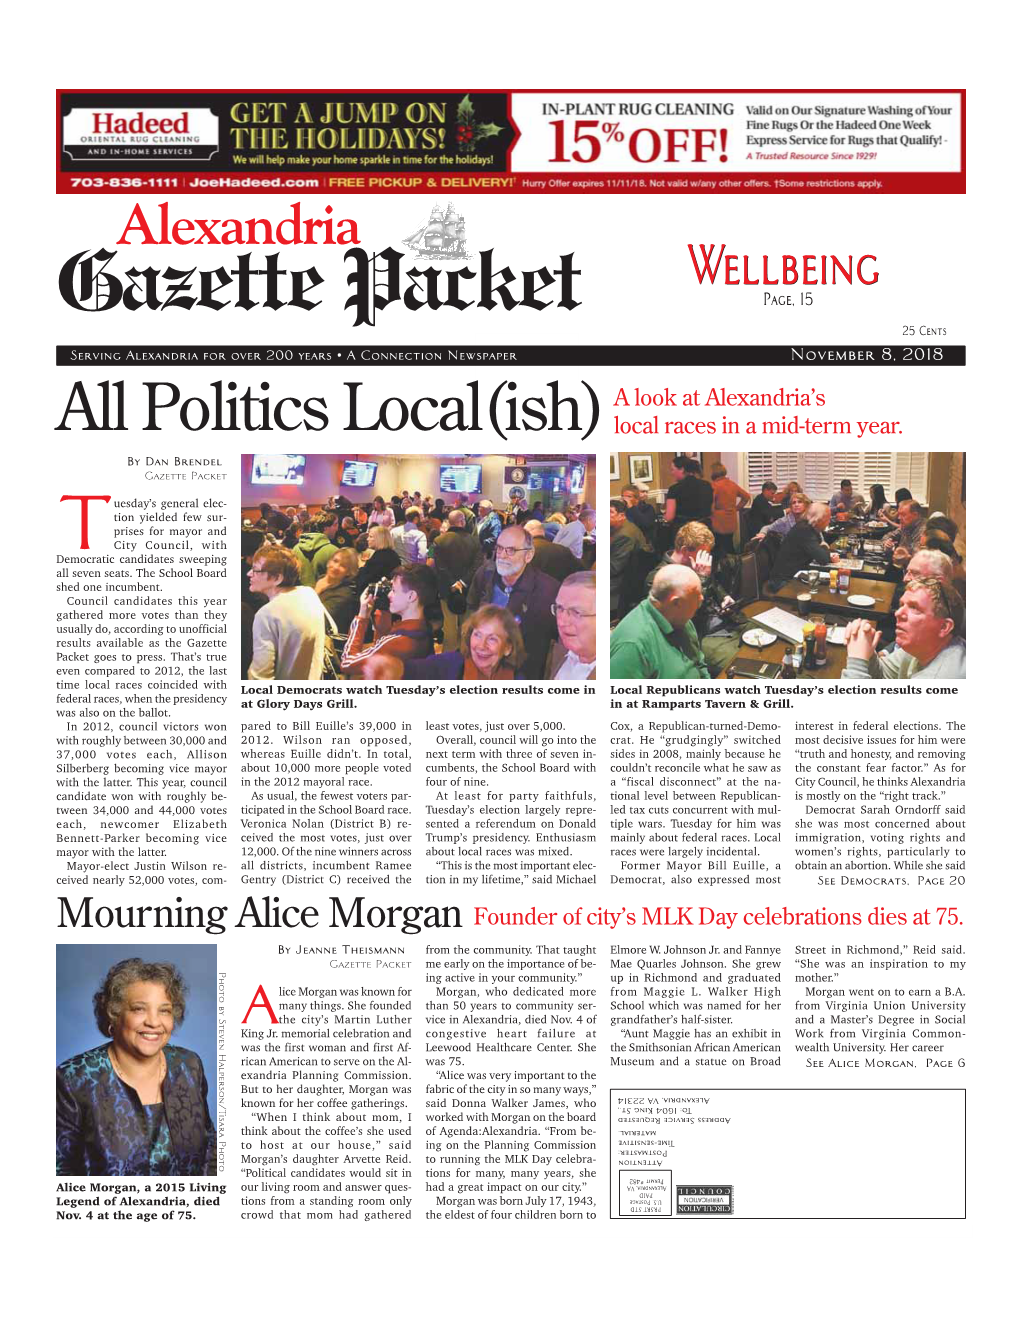 Alexandria Wellbeing Gazette Packet Page, 15 25 Cents Serving Alexandria for Over 200 Years • a Connection Newspaper November 8, 2018